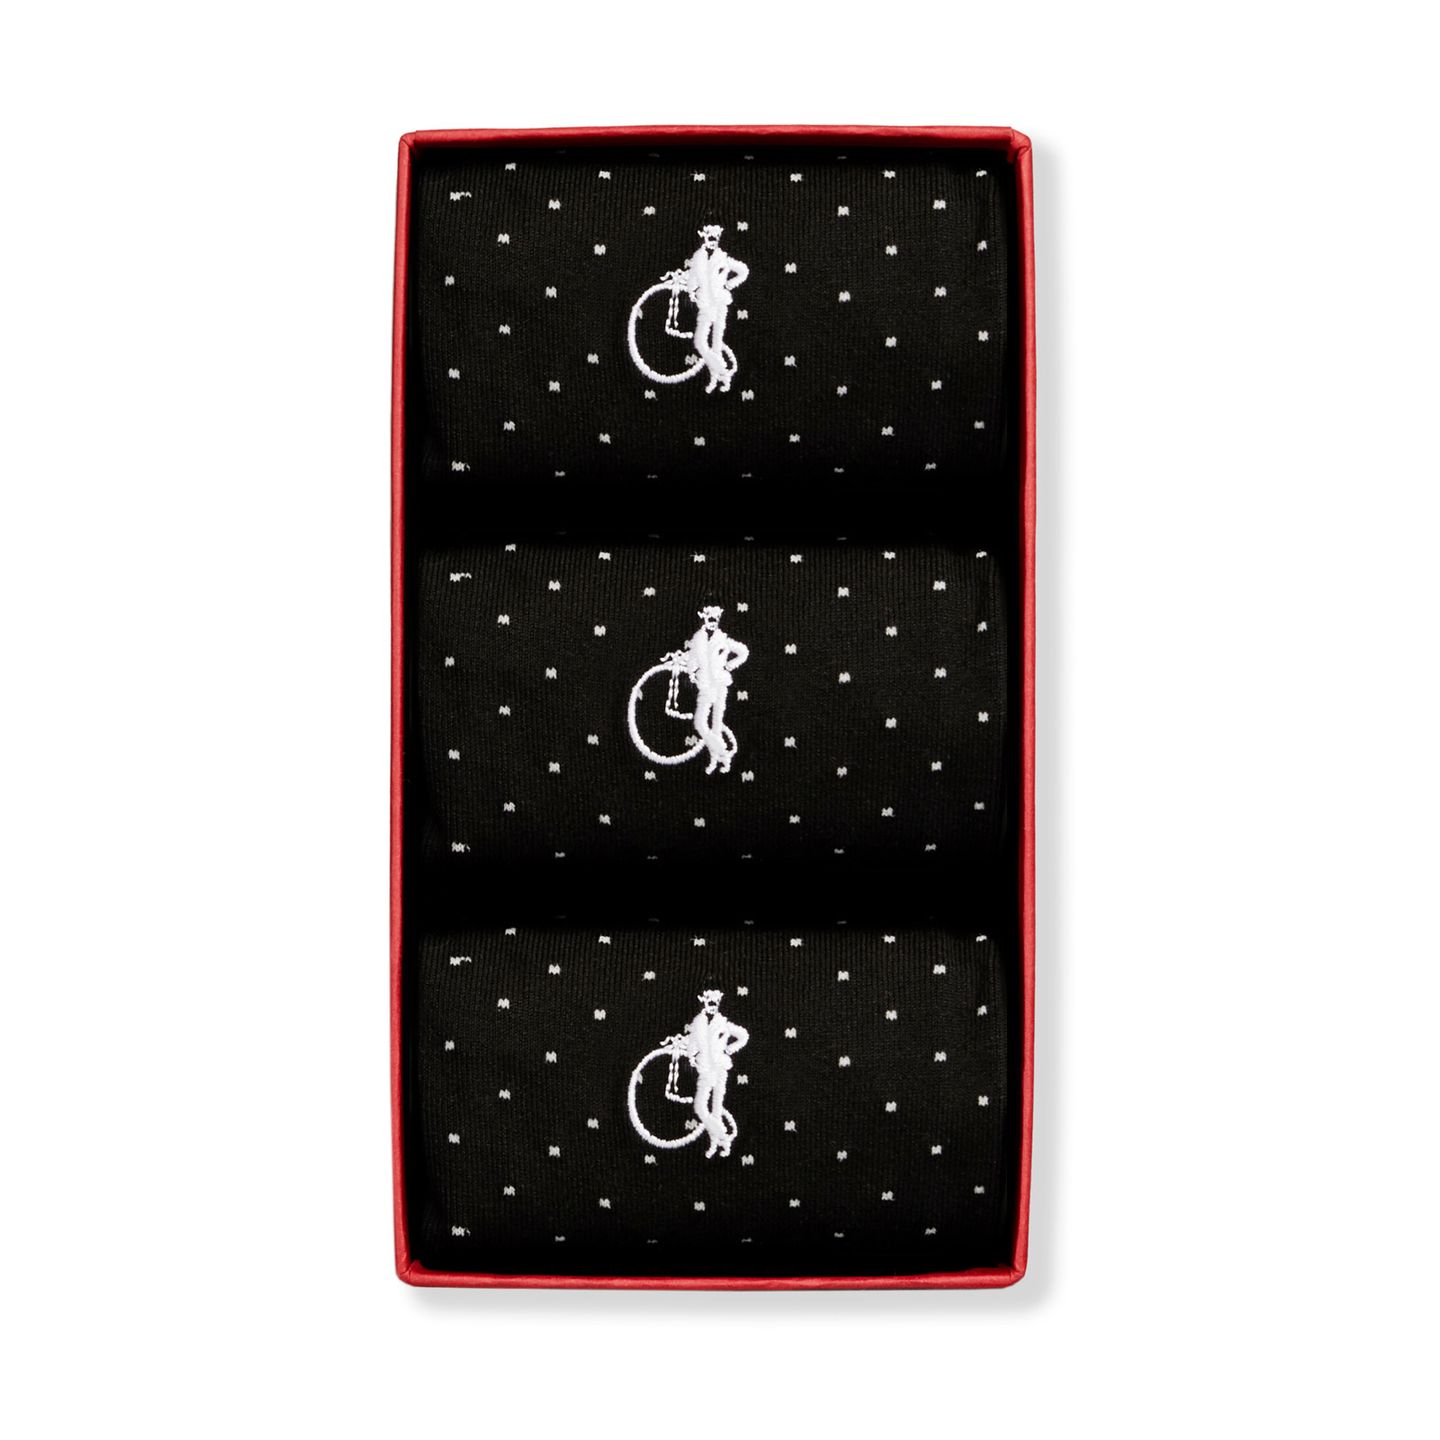 3 pairs of black and white polka dots socks in a box